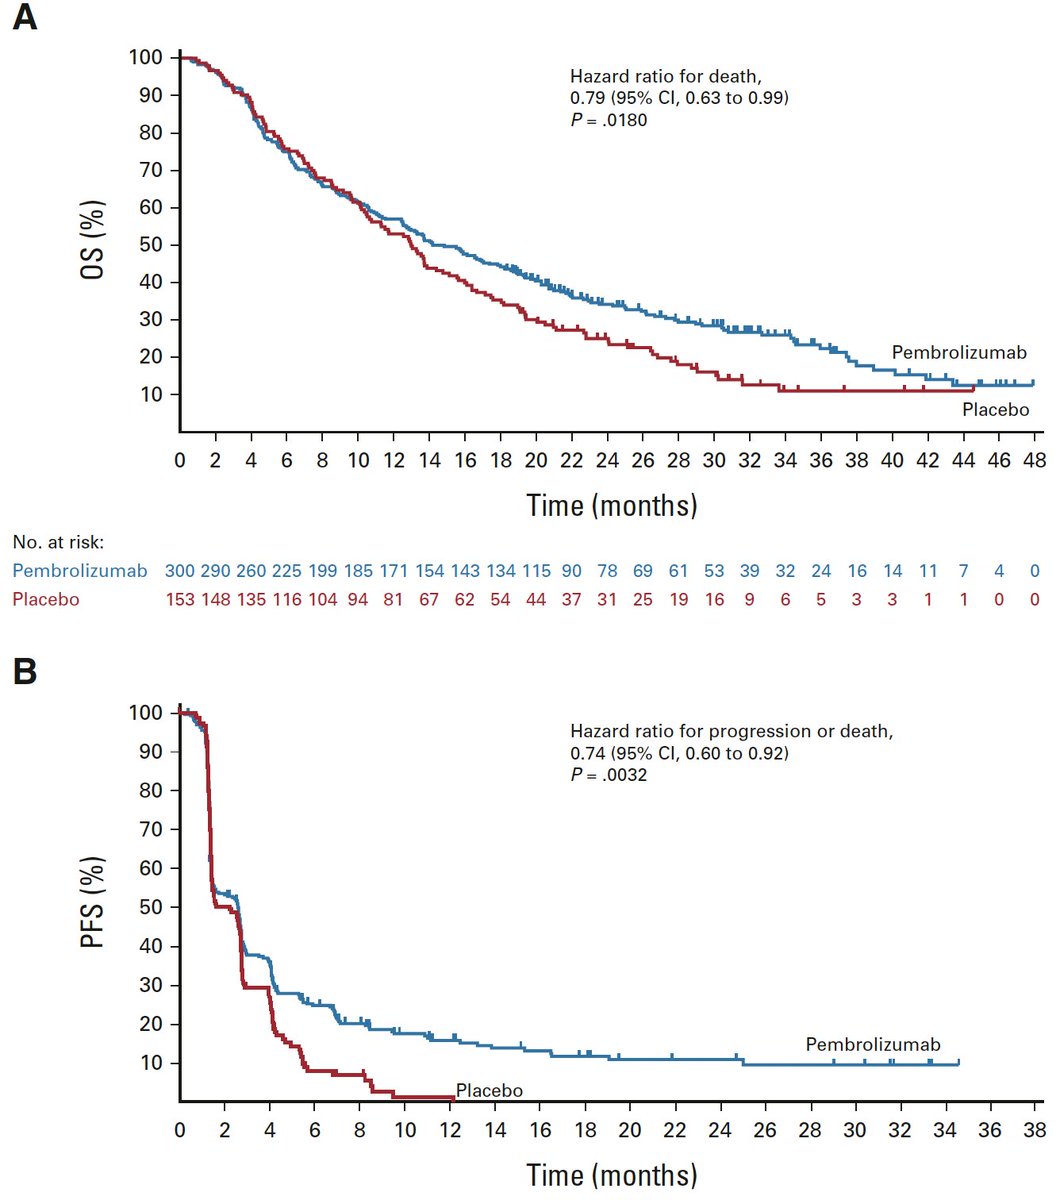 🔥Pembrolizumab vs plc as 2nd Line in  #HepatocellularCarcinoma
@JCO_ASCO 
doi.org/10.1200/JCO.22…
✅Asian phs-III KEYNOTE-394
👉ORR: 12.7 vs 1.3%
👉mPFS: 2.6 vs 2.3 mo
👉moS: 14.6 vs 13.0 mo
🧐In line with KN-224& 240-> efficacy in a subgroup
@myESMO @EASLedu #livertwitter